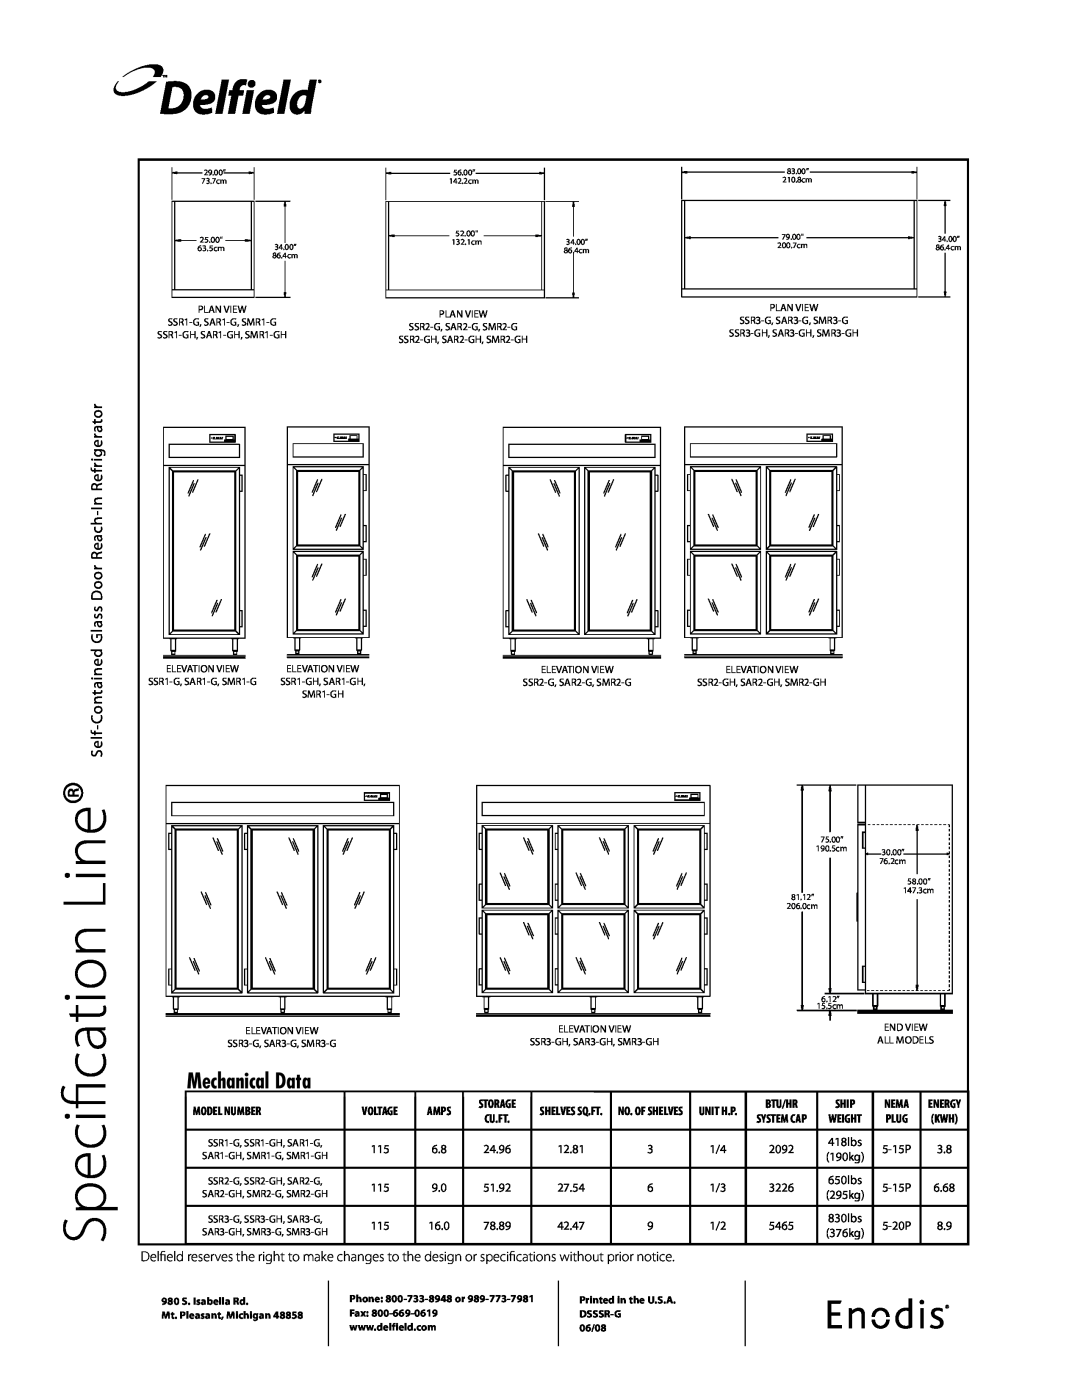 Delfield SAR Line, Specification, Delfield, Mechanical Data, Glass Door Reach-InRefrigerator, Self-Contained, Model Number 